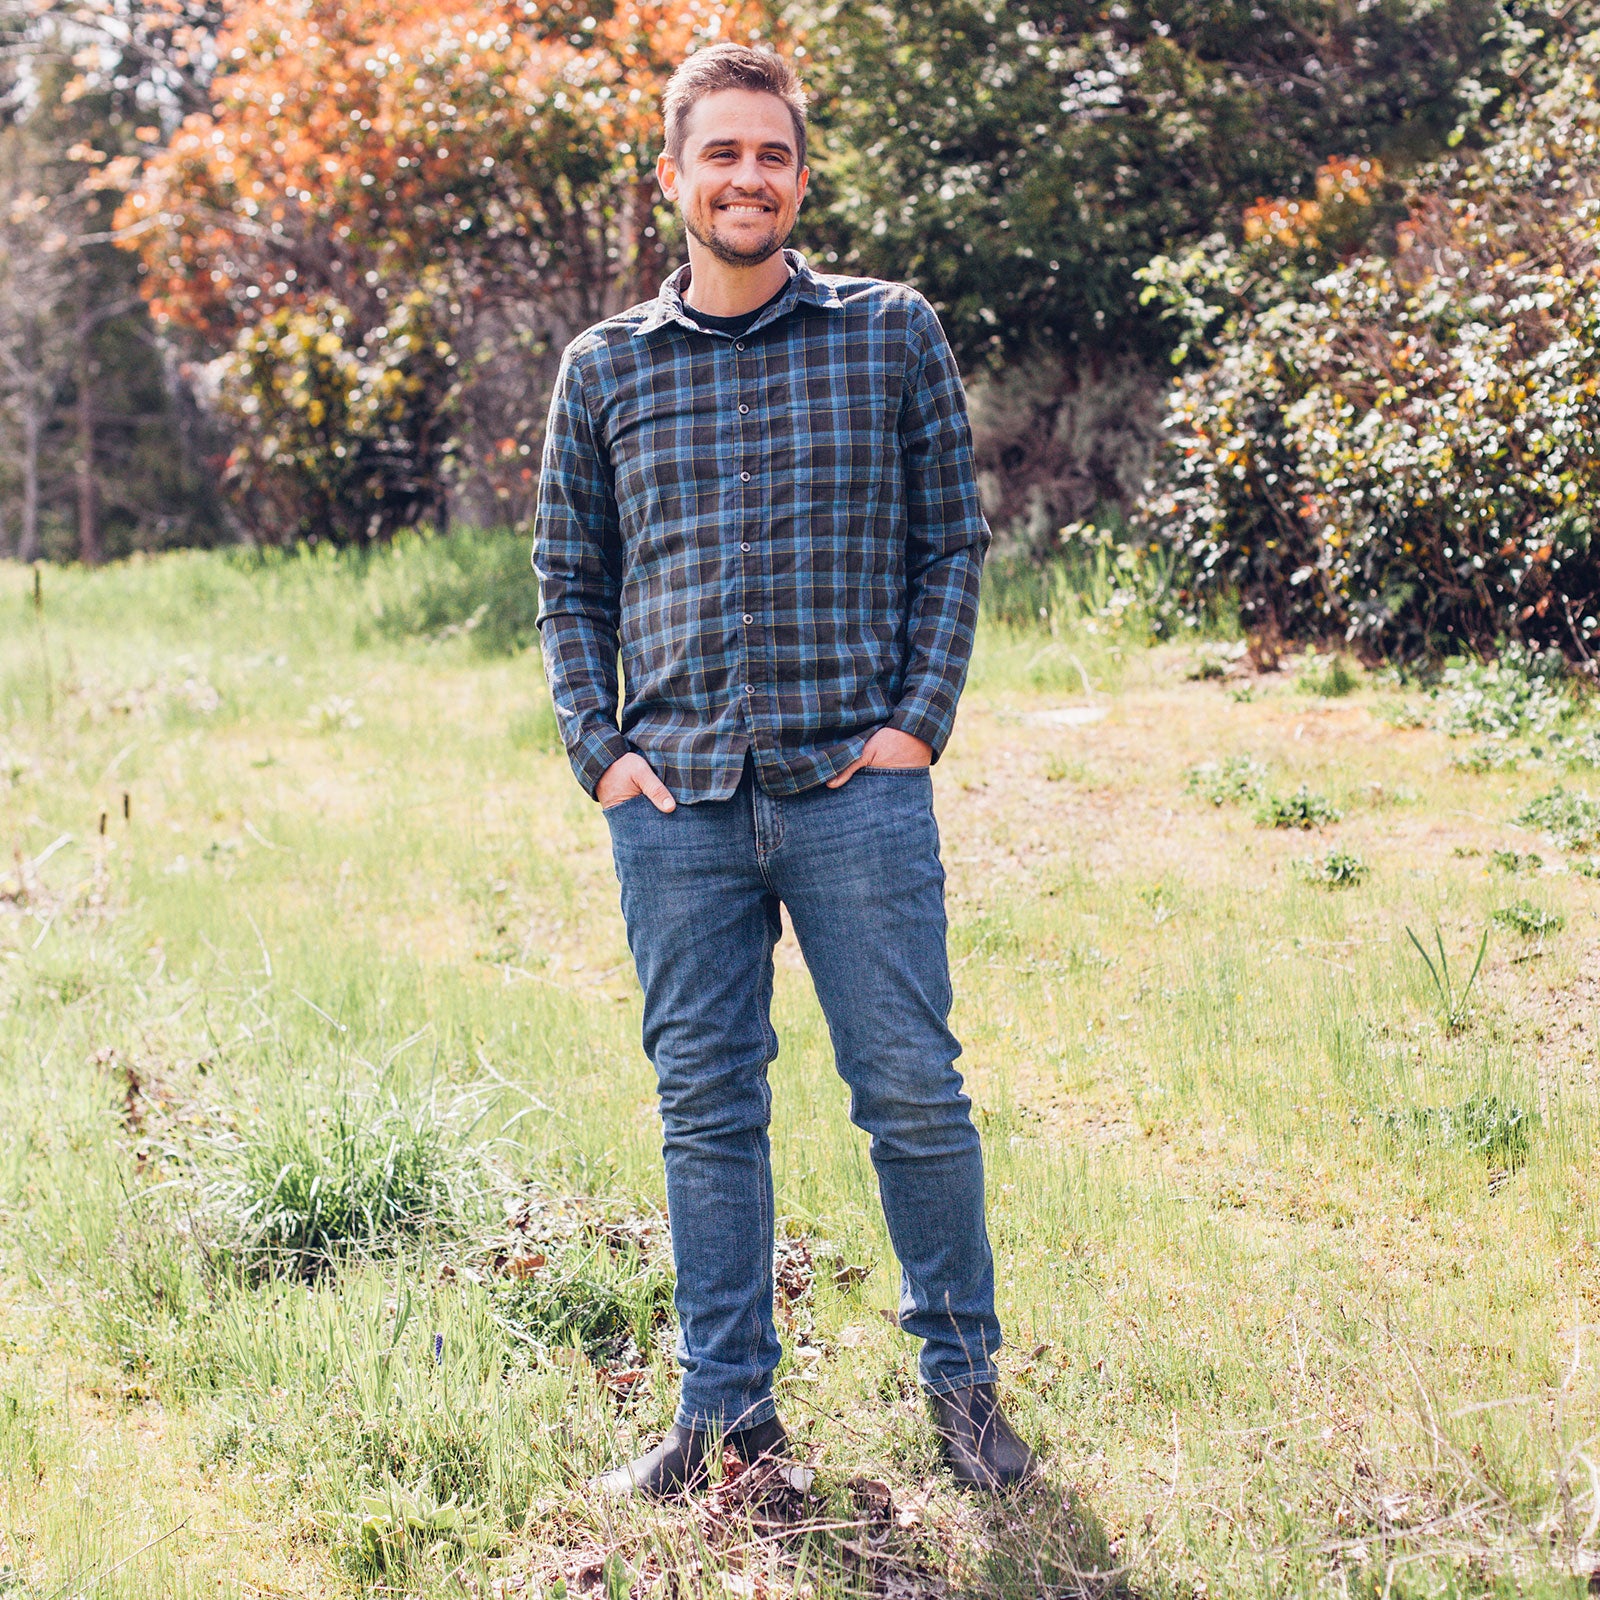 Get into Fall/Winter with the Fireside Denim and Merino Everyday